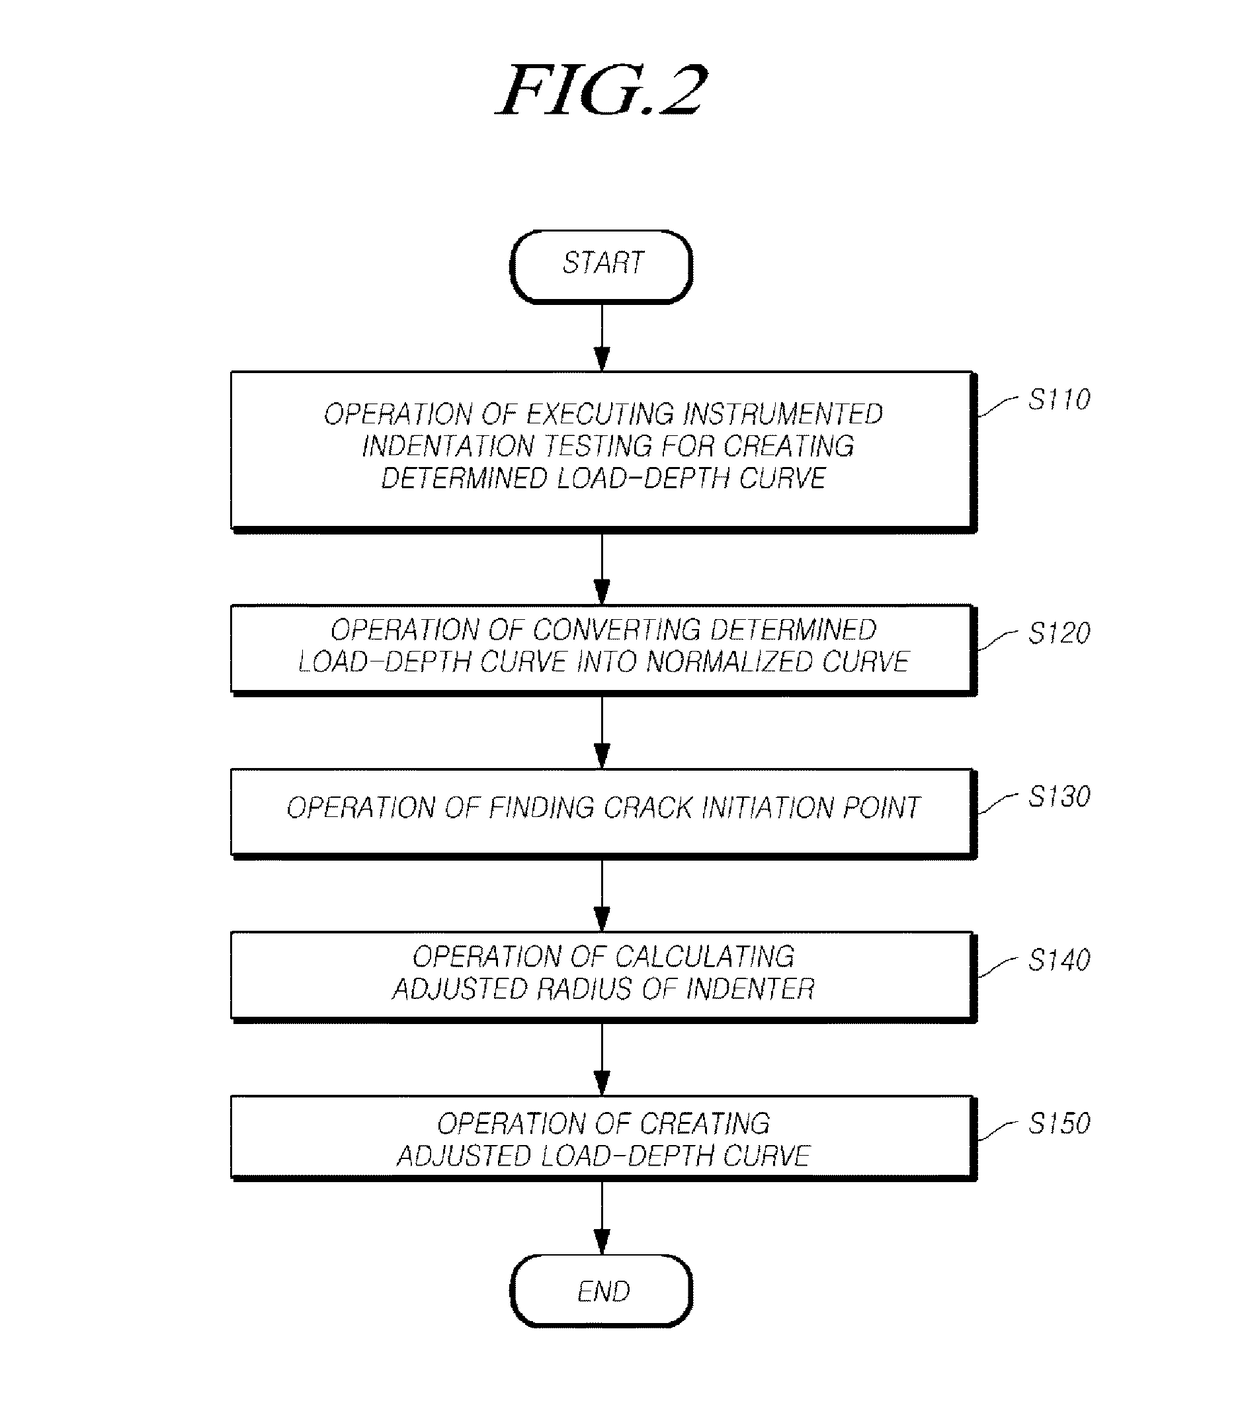 Method for evaluating fracture toughness using instrumented indentation testing